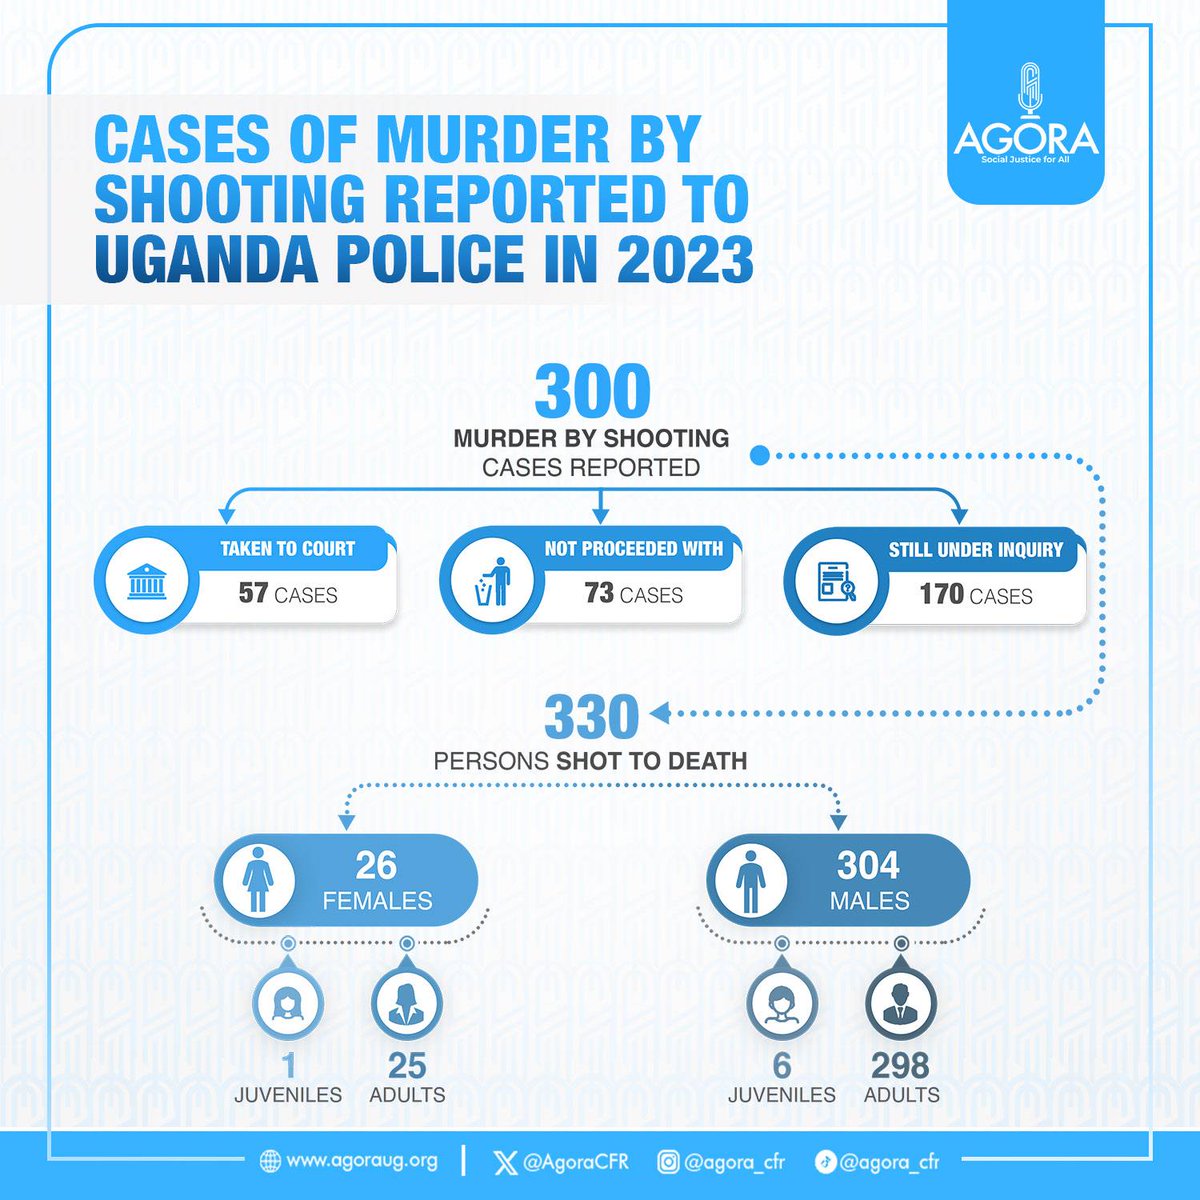 A total of 300 cases of Murder by Shooting were reported to the Police countrywide in 2023, 330 persons were shot dead, of whom 298 were Male Adults.